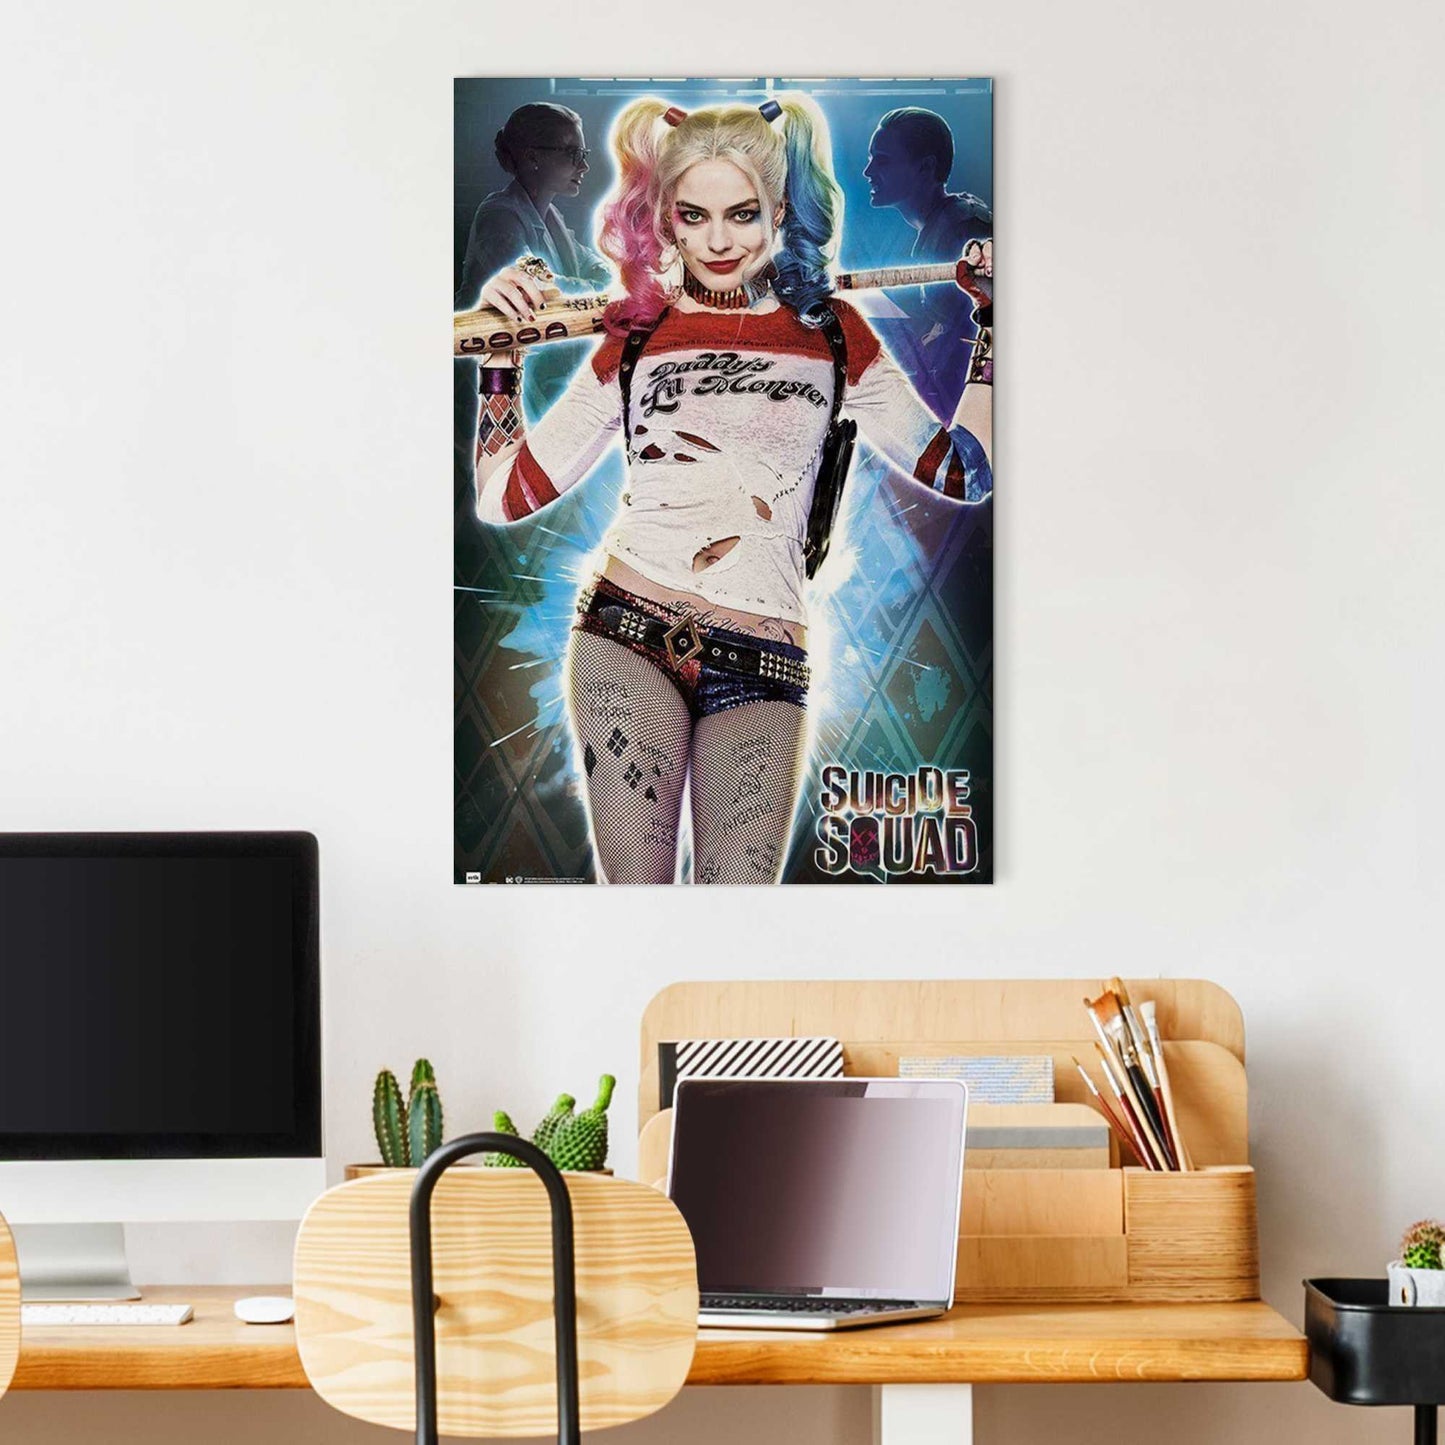 Painting Suicide Squad - Harley Quinn daddys lil monster 90x60